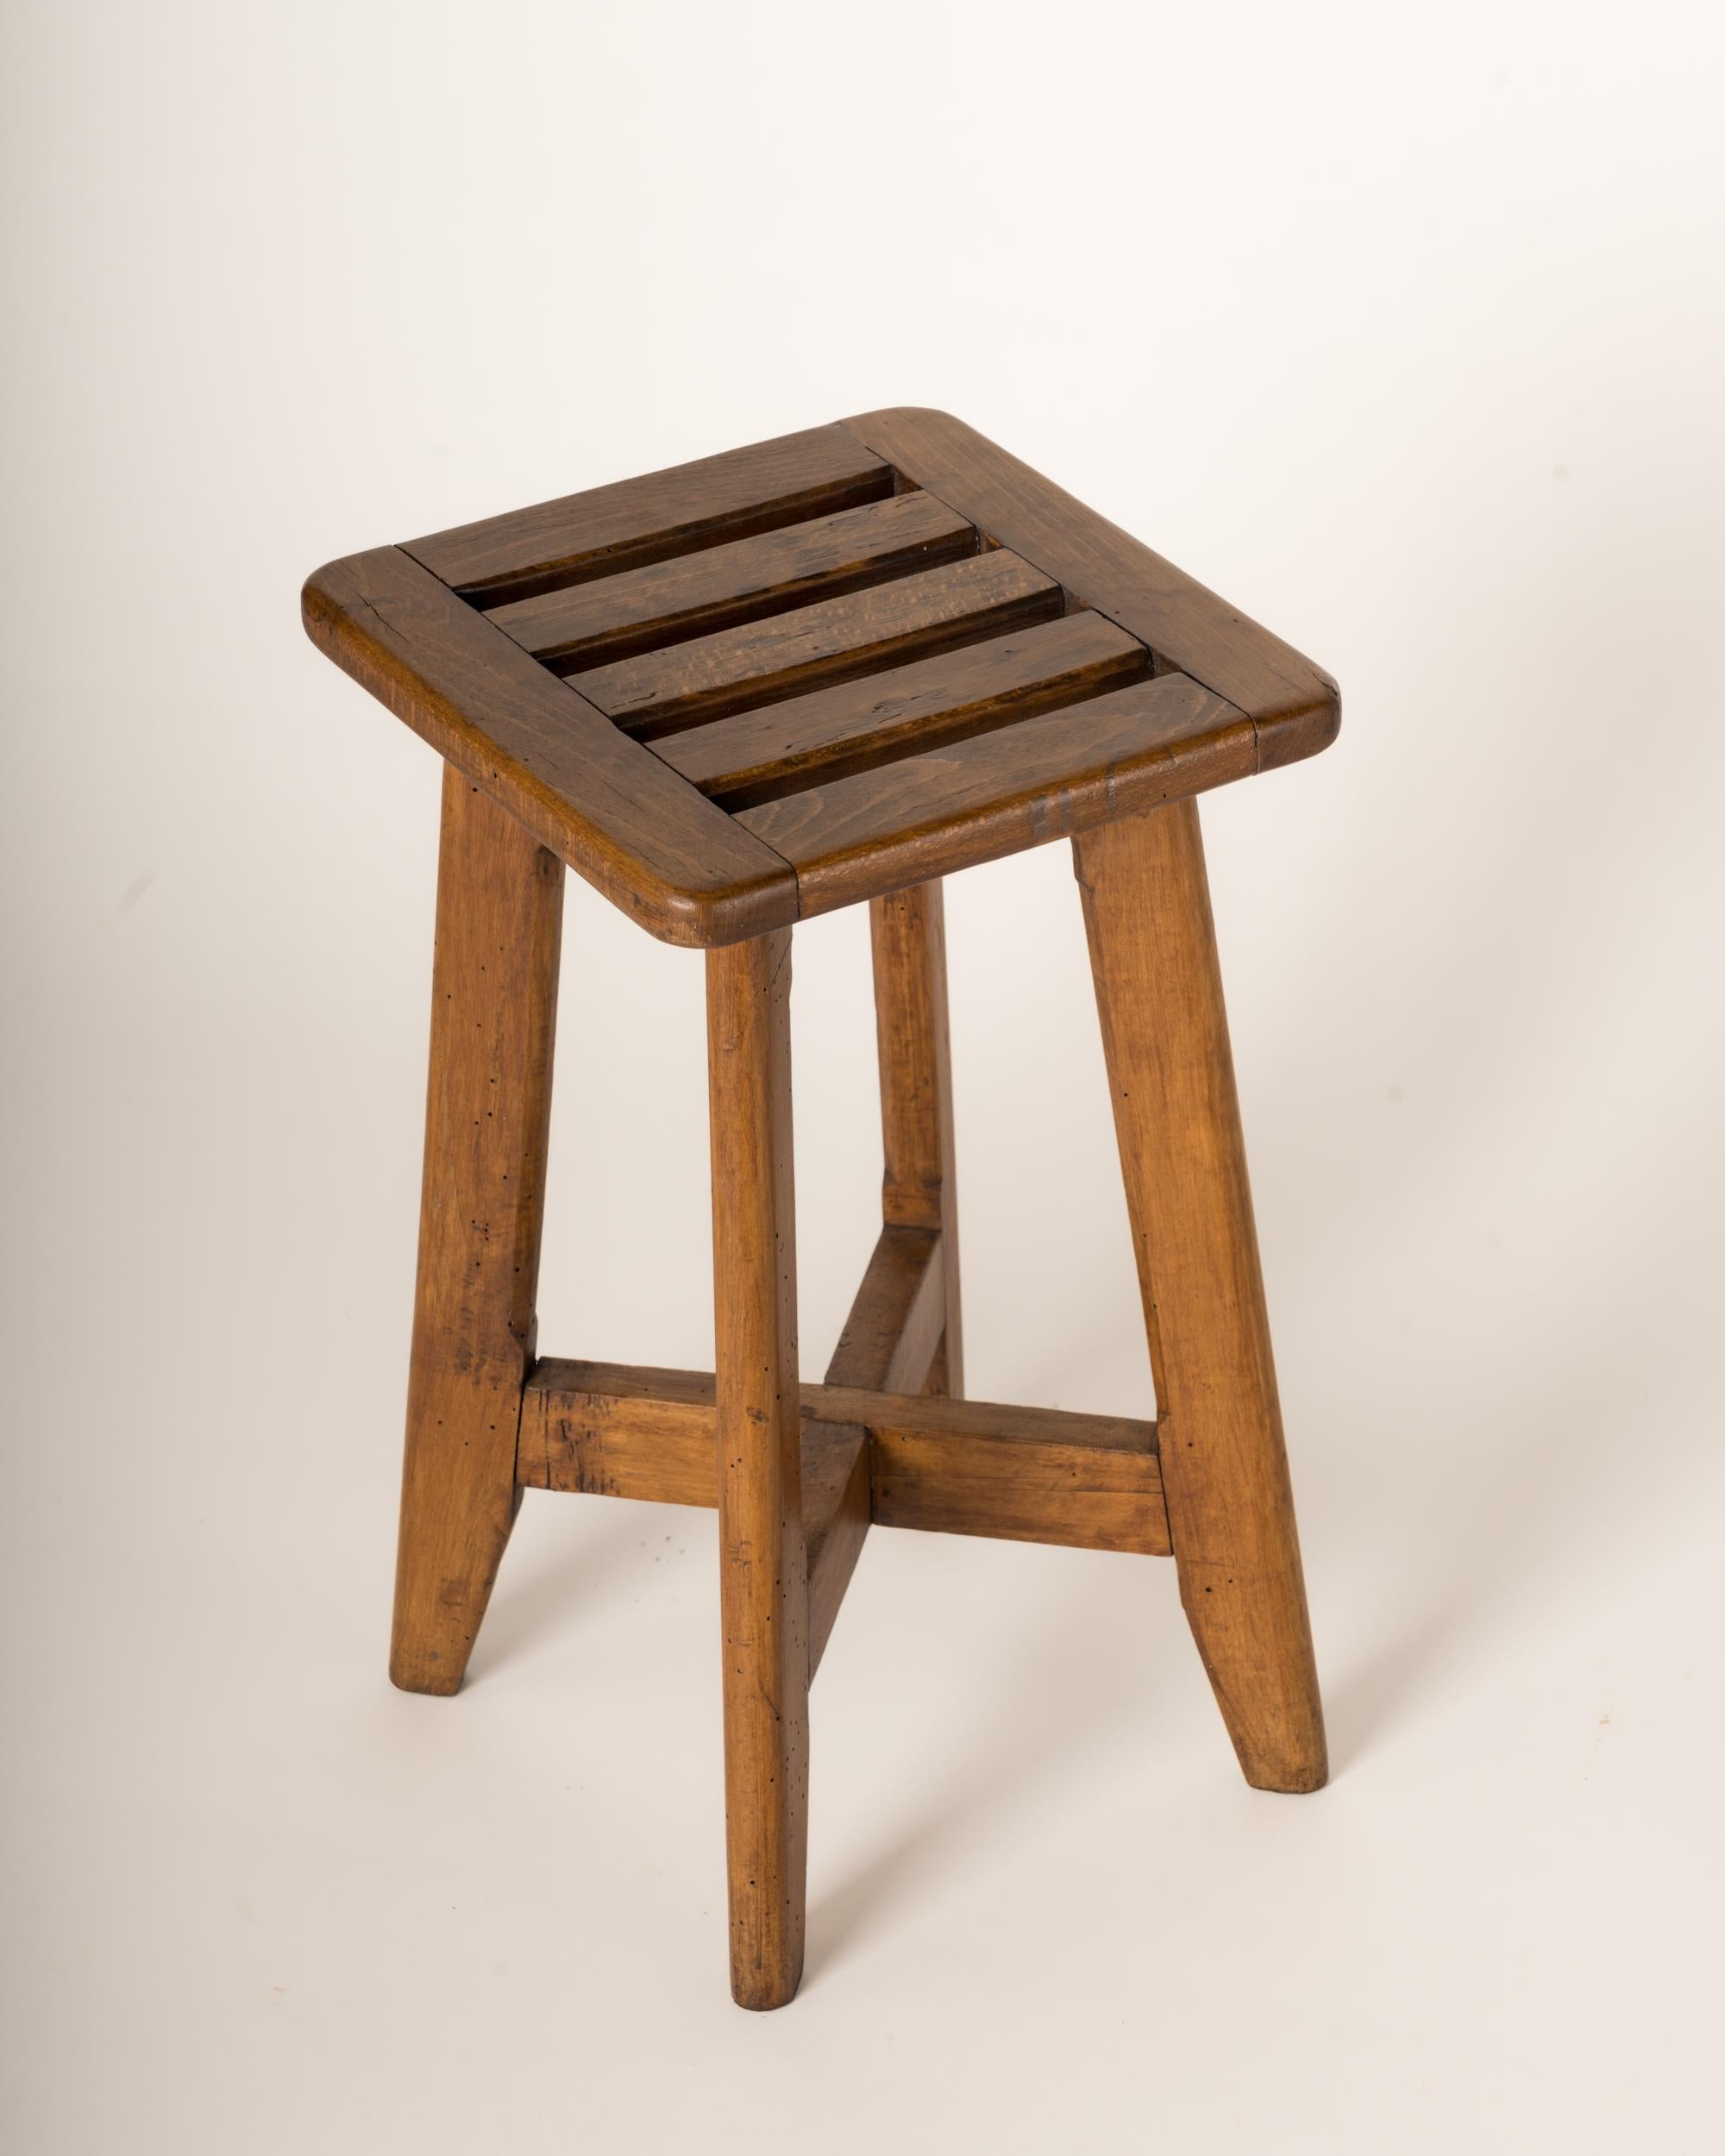 Minimalist split slats stool in the style of Marcel Gascoin, a French 